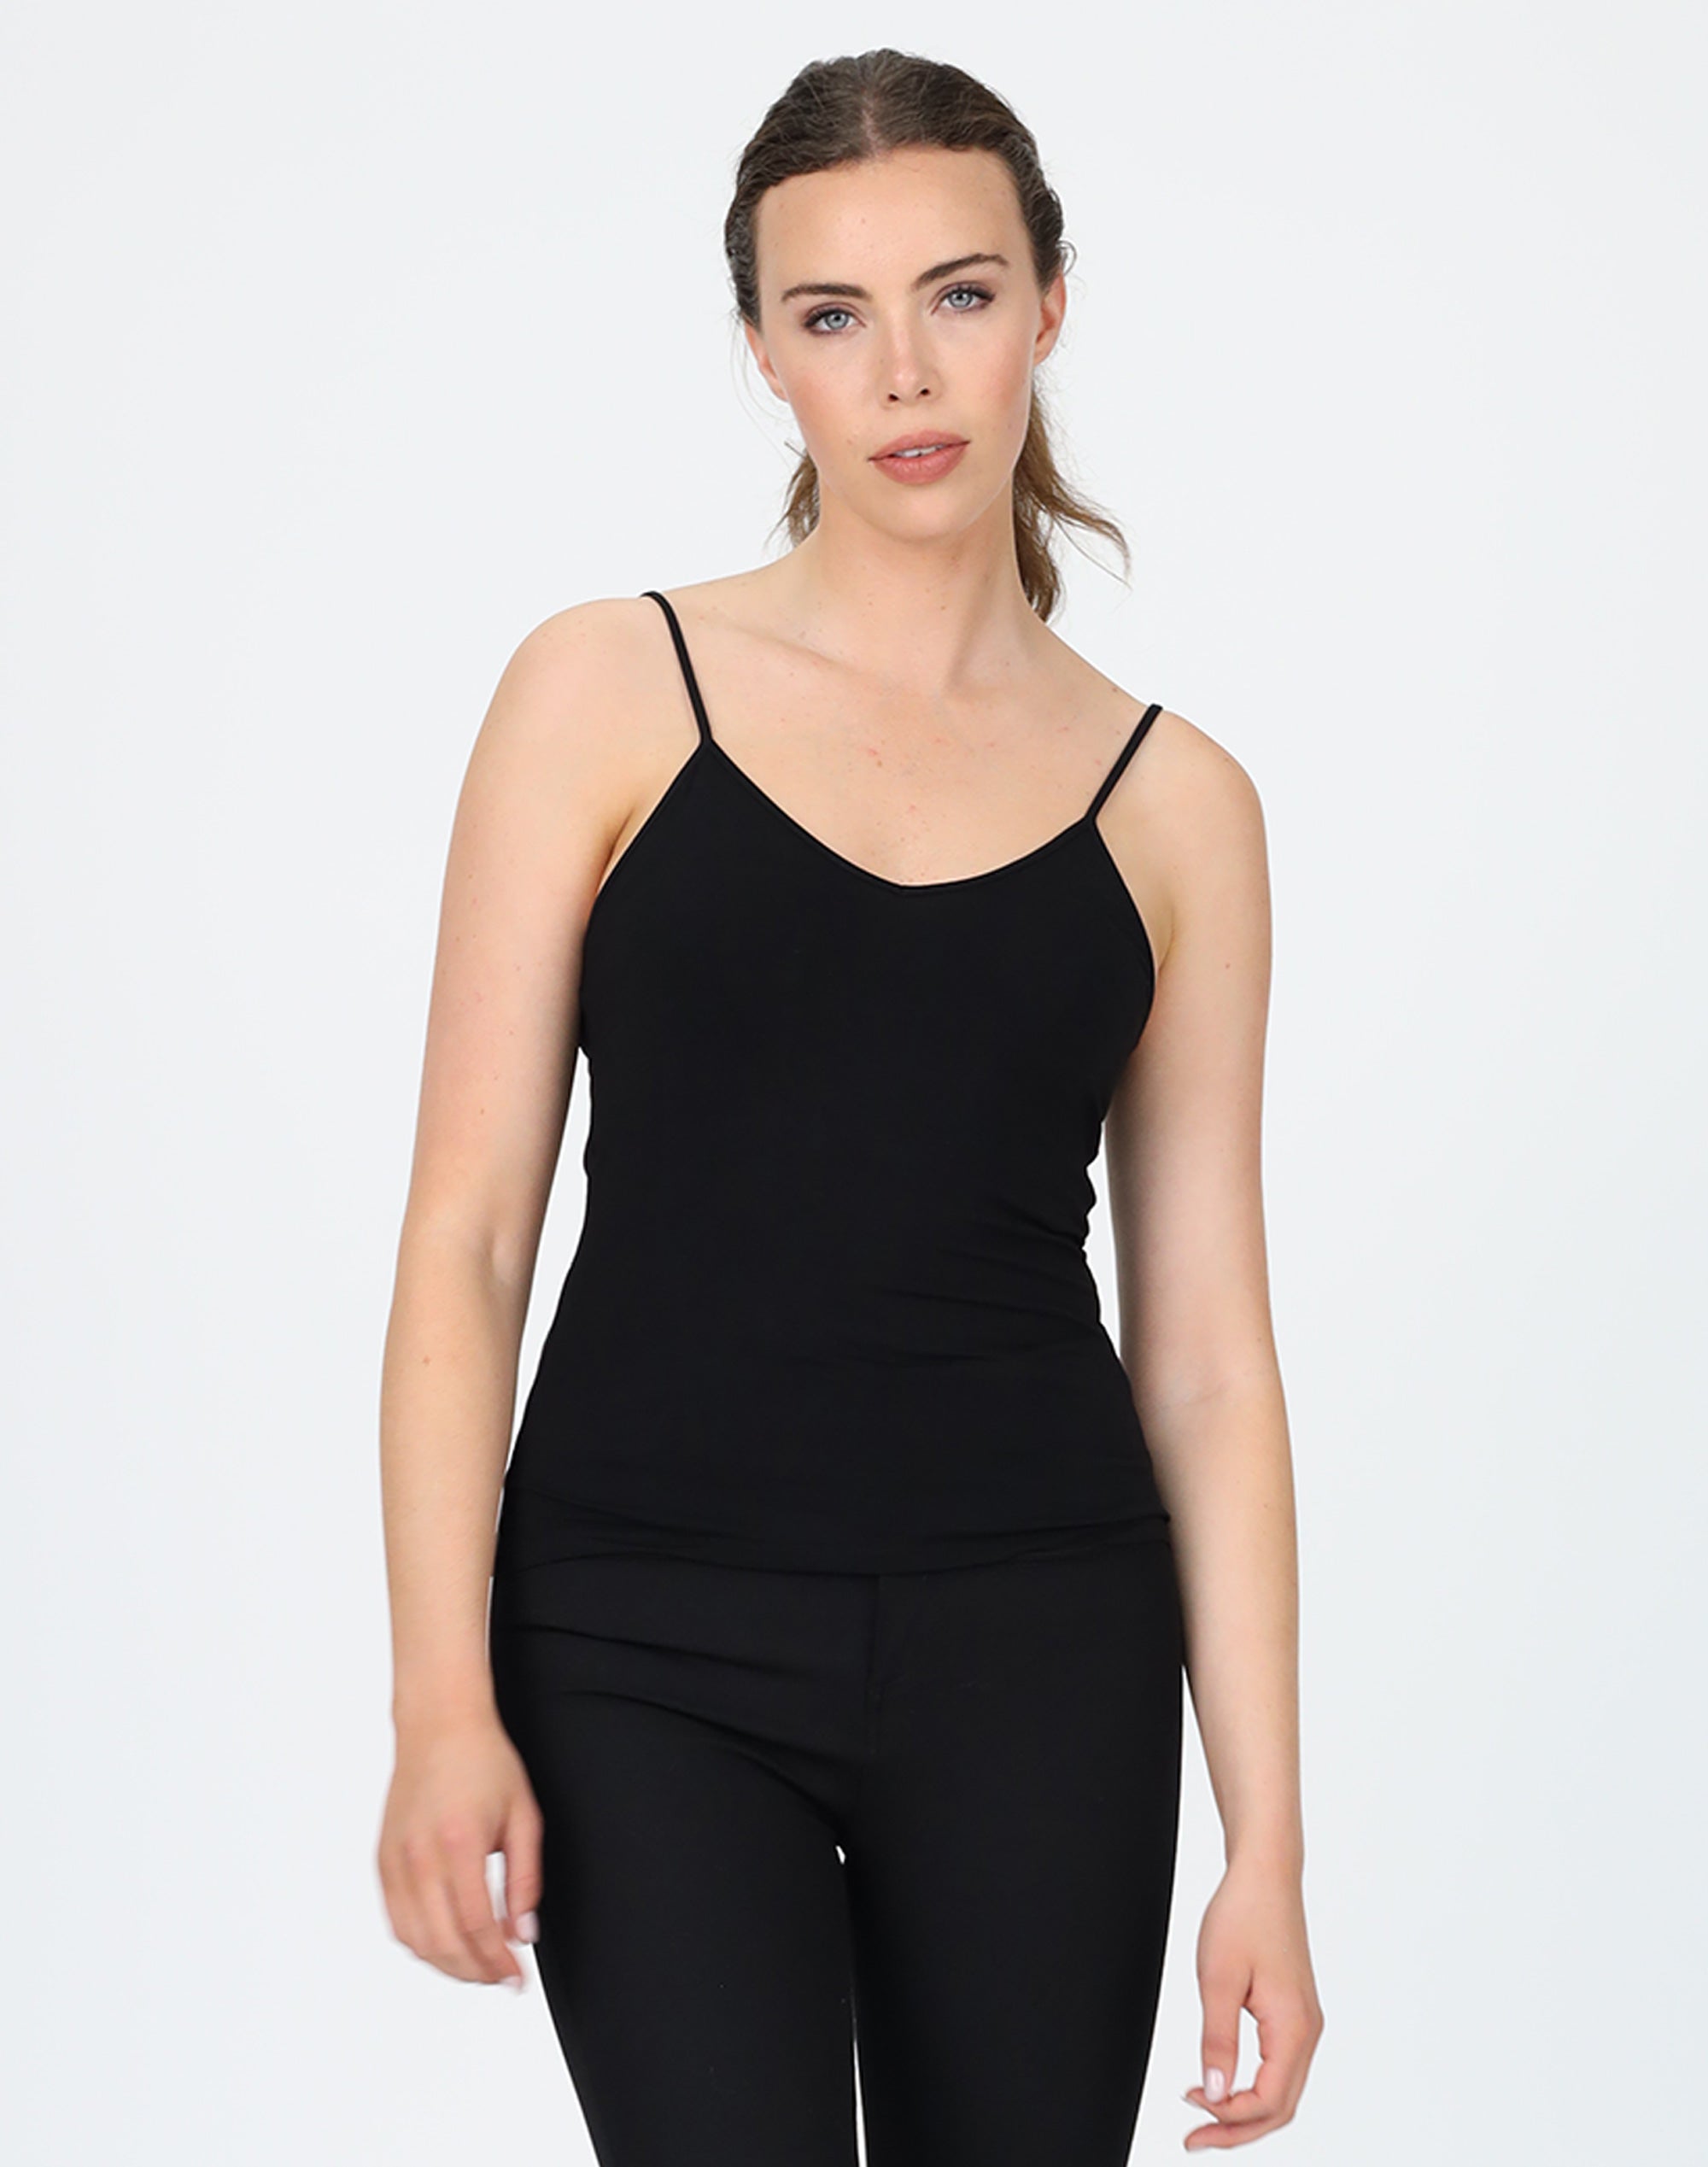 Essential Knit Cami - Black - Tops - Sleeveless - Women's Clothing - Storm